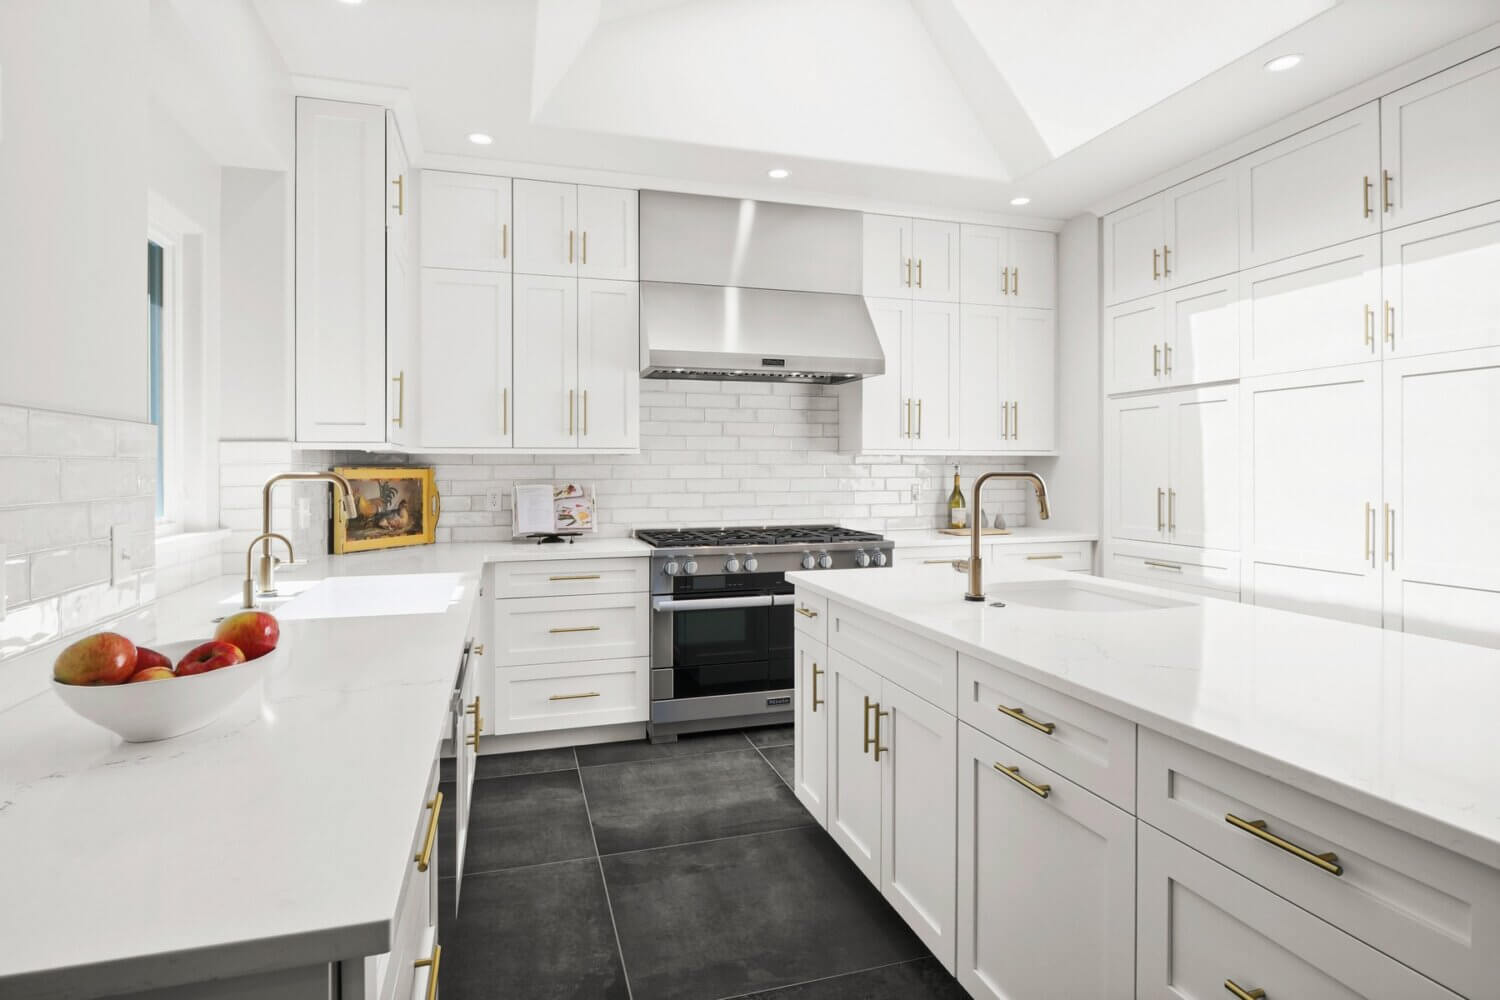 Bright white kitchen design with dark gray tiled floors. The cabinetry features modern shaker doors with a crisp, pure white paint color.